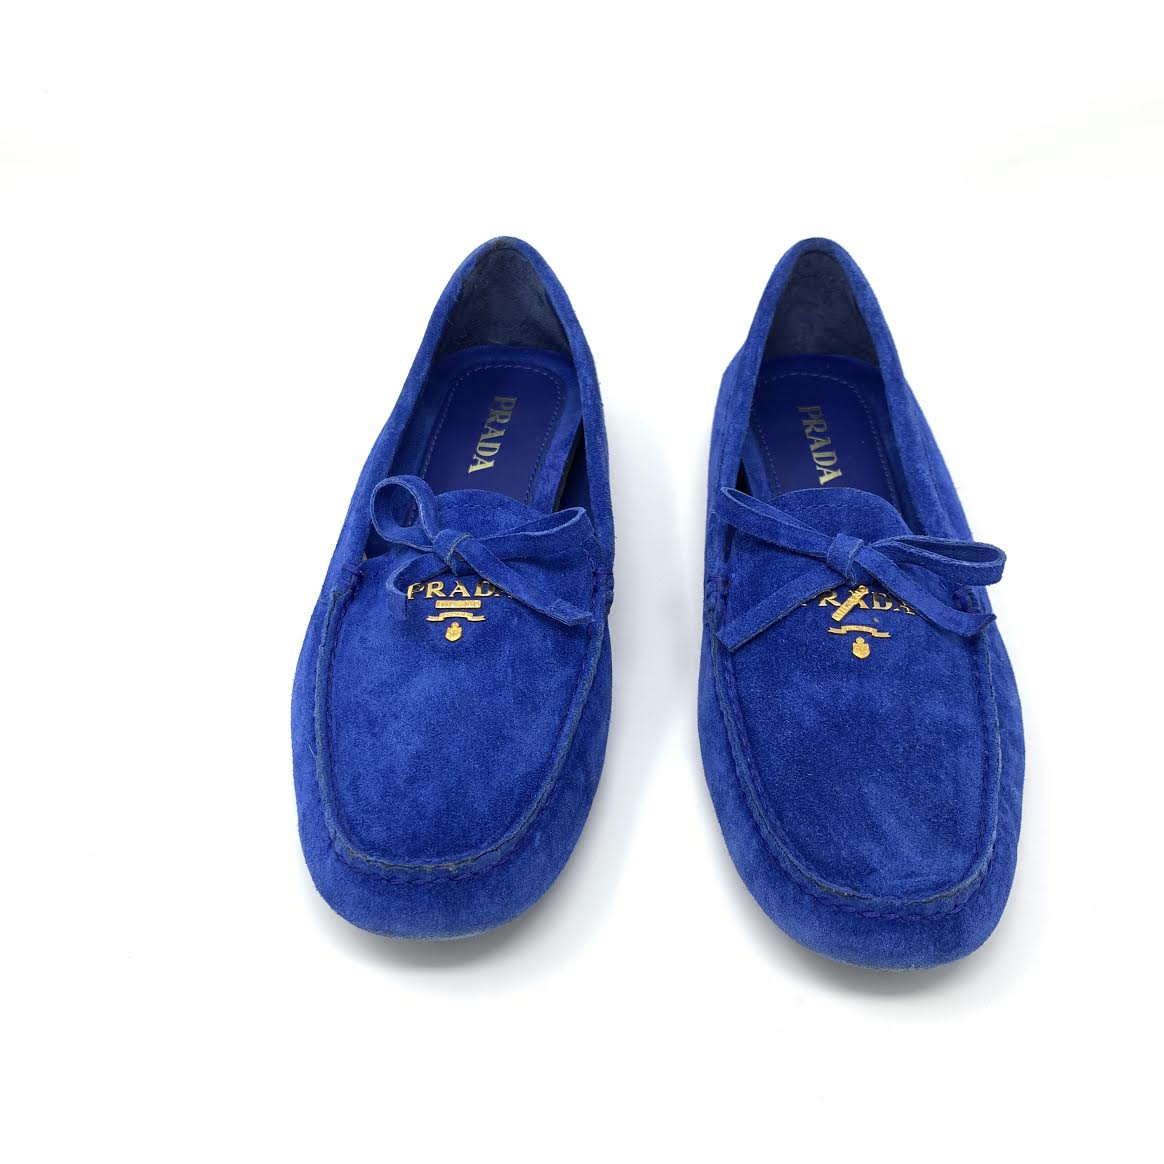 Prada Suede Driving Loafers - Size 